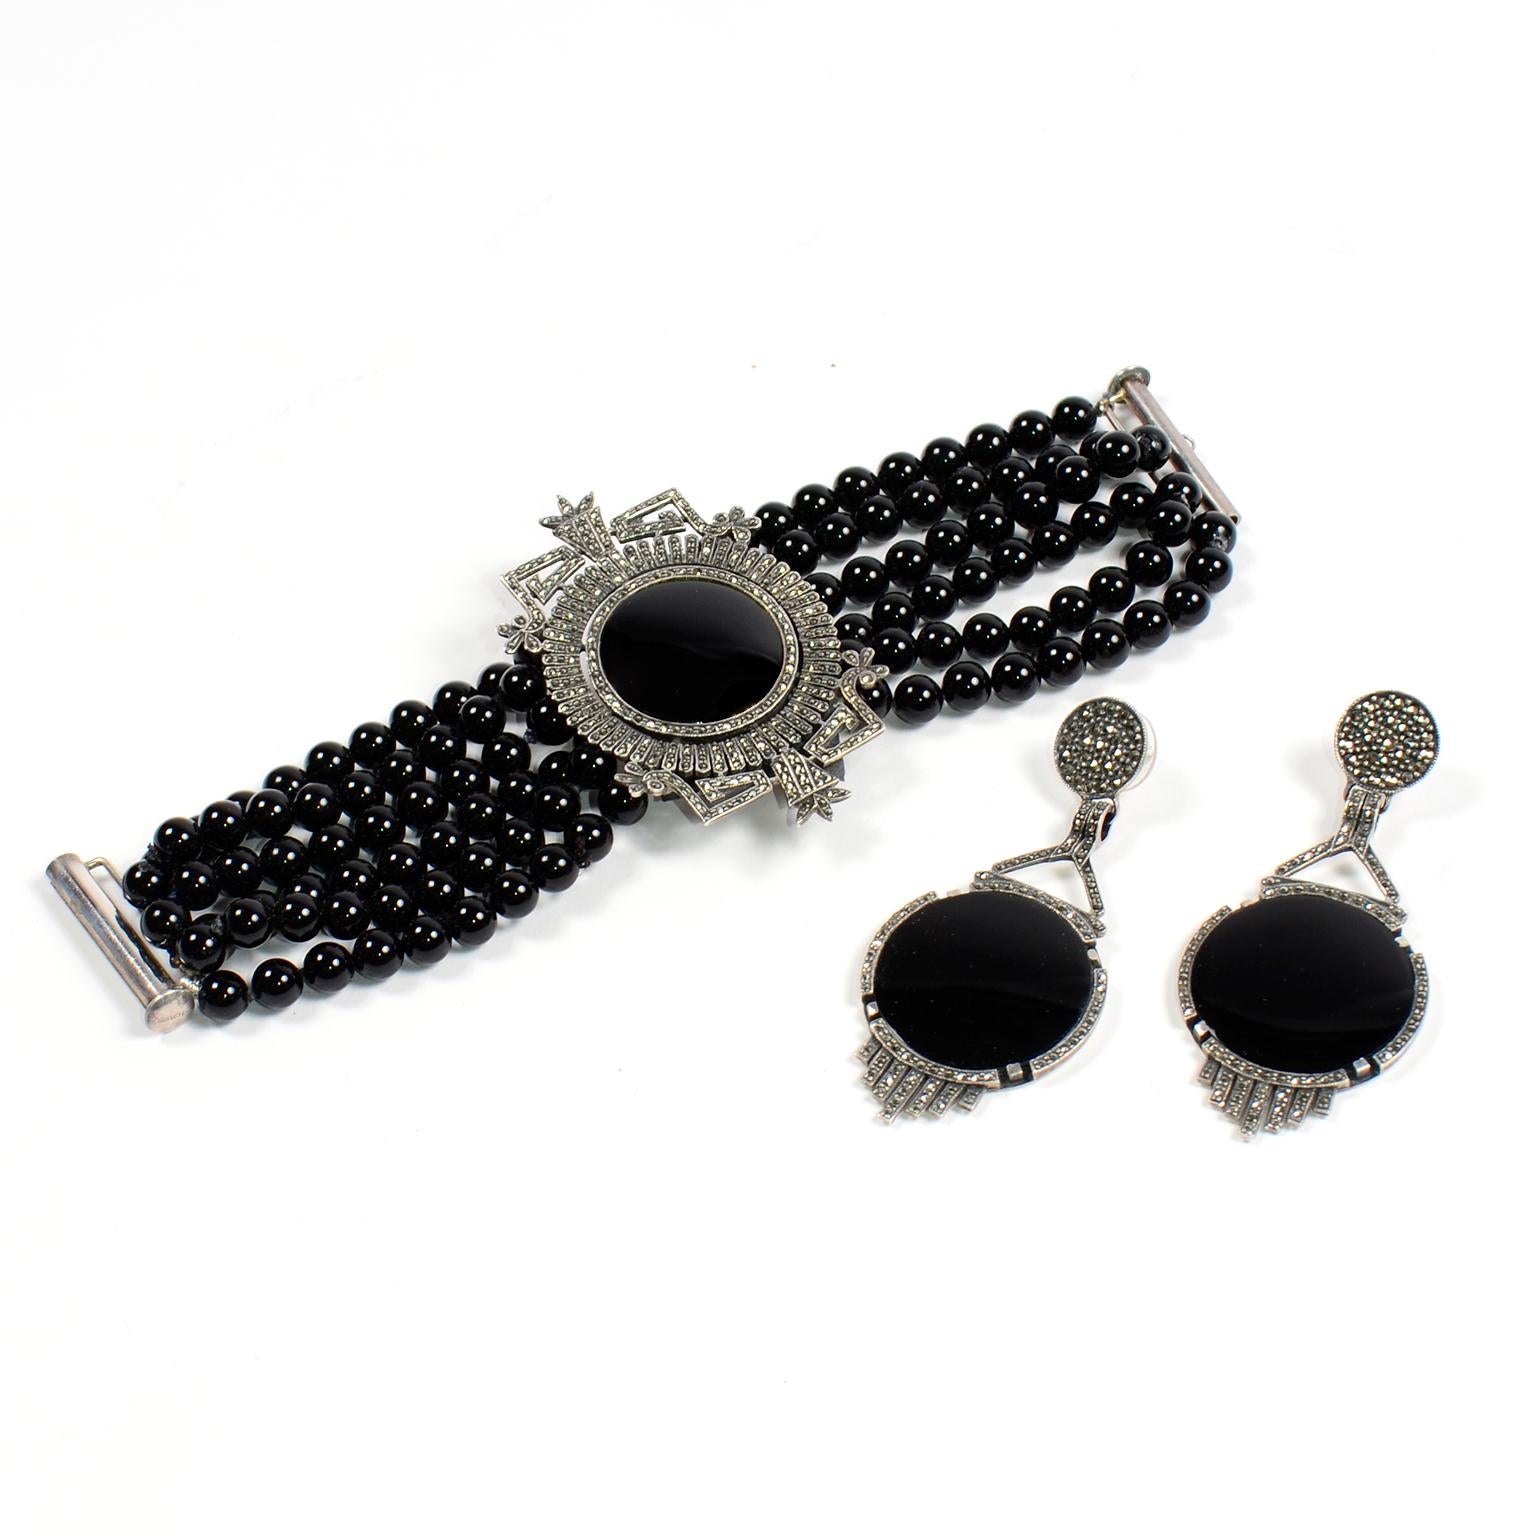 This is an exquisite vintage sterling silver marcasite and onyx bracelet and earring set from the 1980's.  This gorgeous set came from an estate we acquired that had outstanding vintage jewelry and clothing from the 1970's and 1980's. This  includes